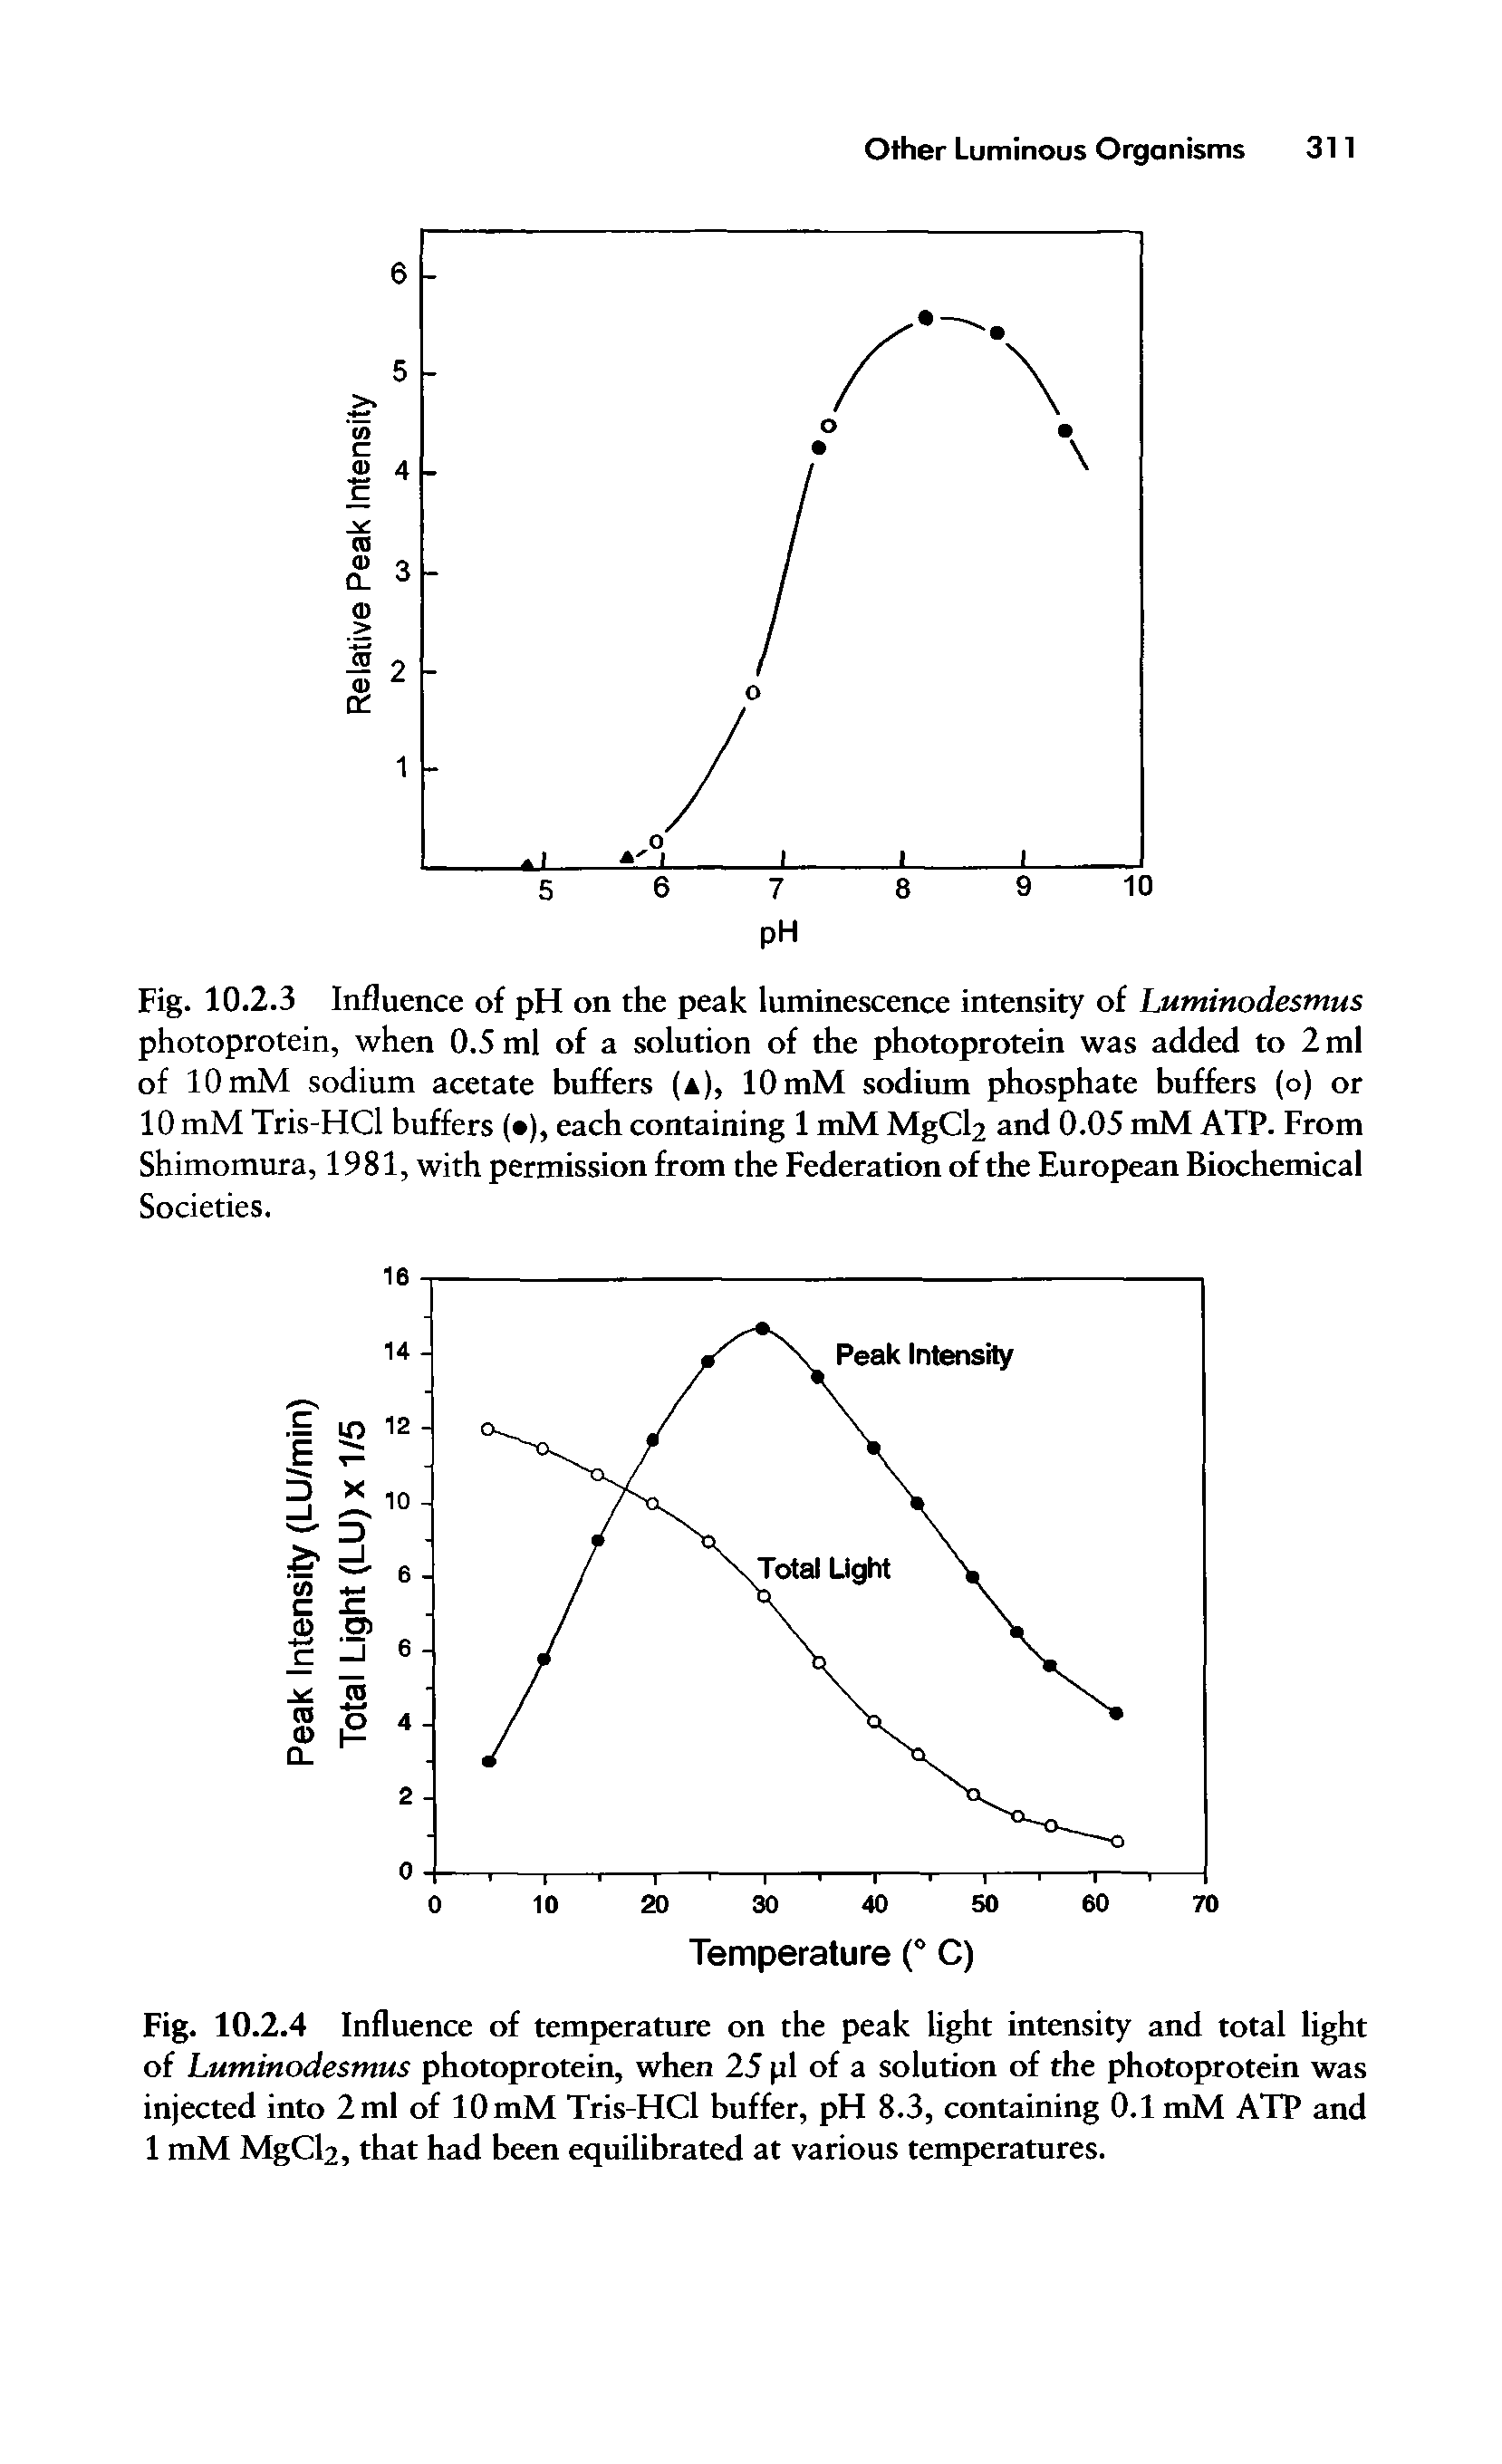 Fig. 10.2.4 Influence of temperature on the peak light intensity and total light of Luminodesmus photoprotein, when 25 pi of a solution of the photoprotein was injected into 2ml of lOmM Tris-HCl buffer, pH 8.3, containing 0.1 mM ATP and 1 mM MgCl2, that had been equilibrated at various temperatures.